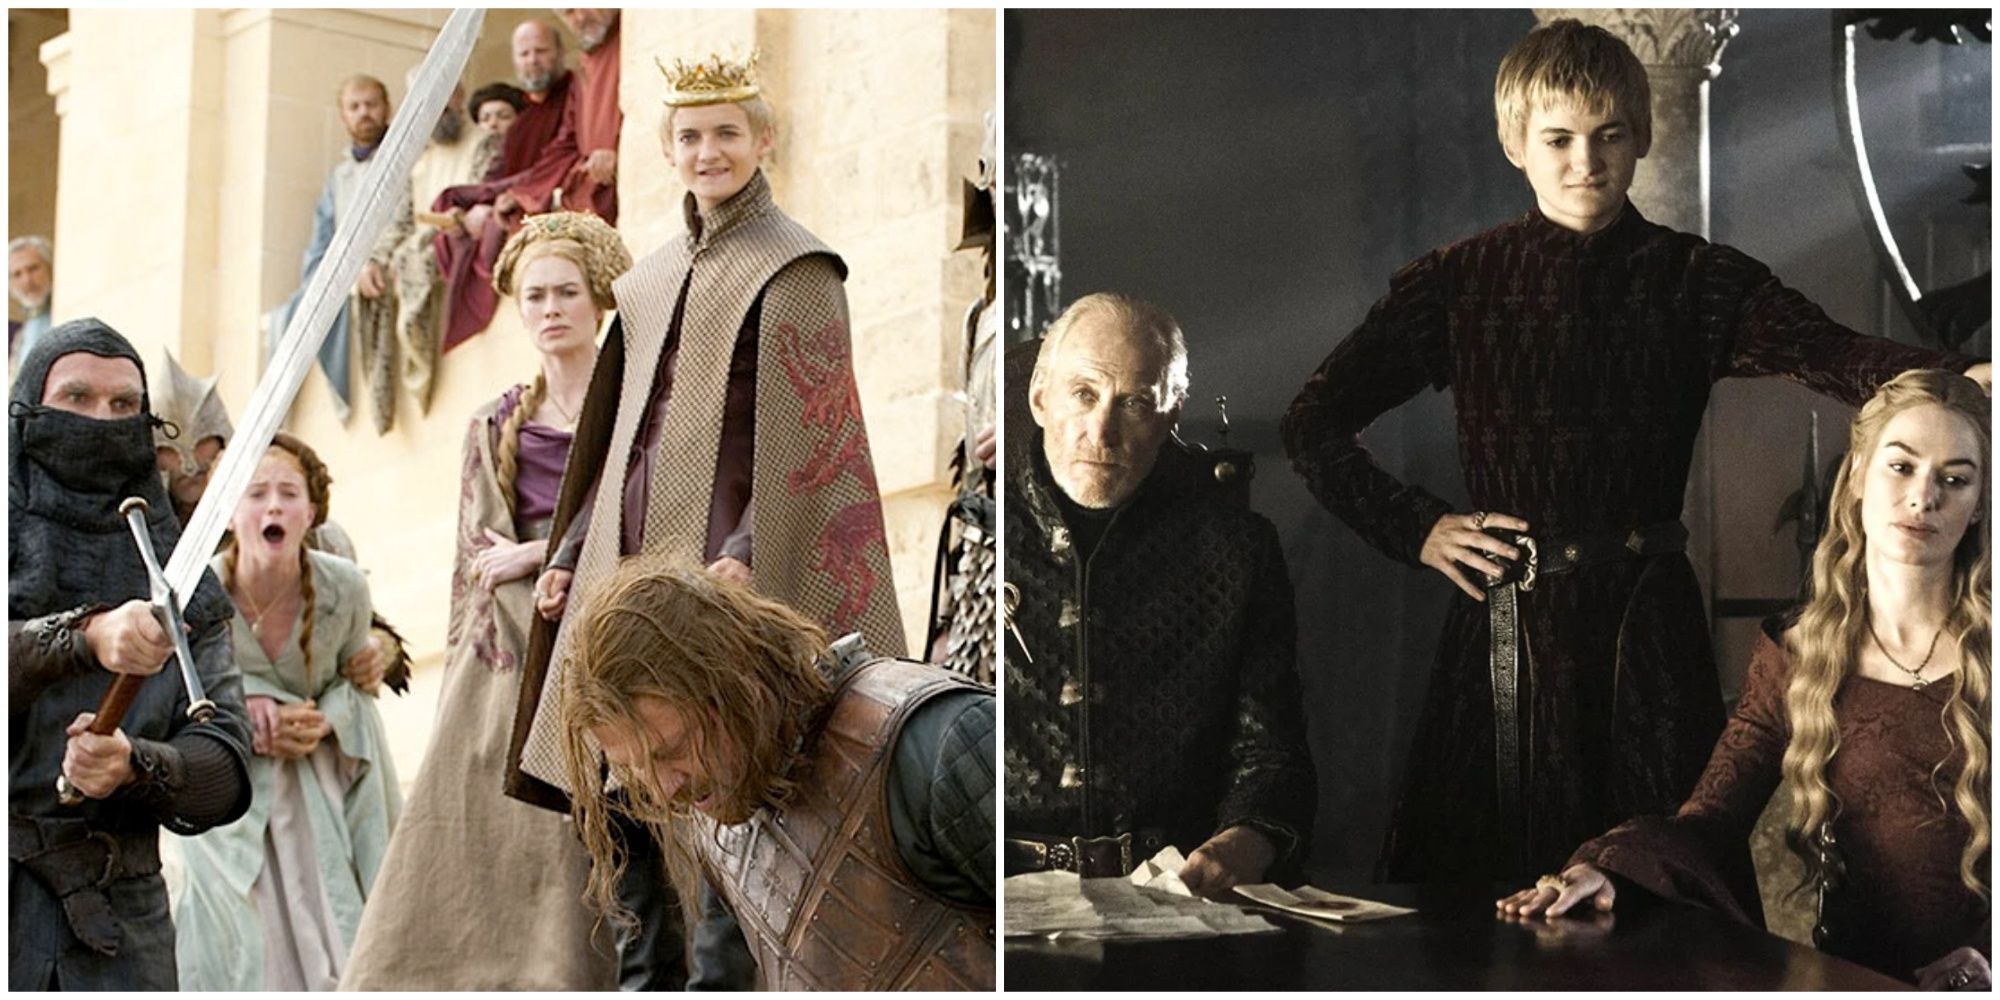 Split image of Ned Stark's beheading and Tywin Lannister Joffrey Baratheon and Cersei Lannister in Game of Thrones.